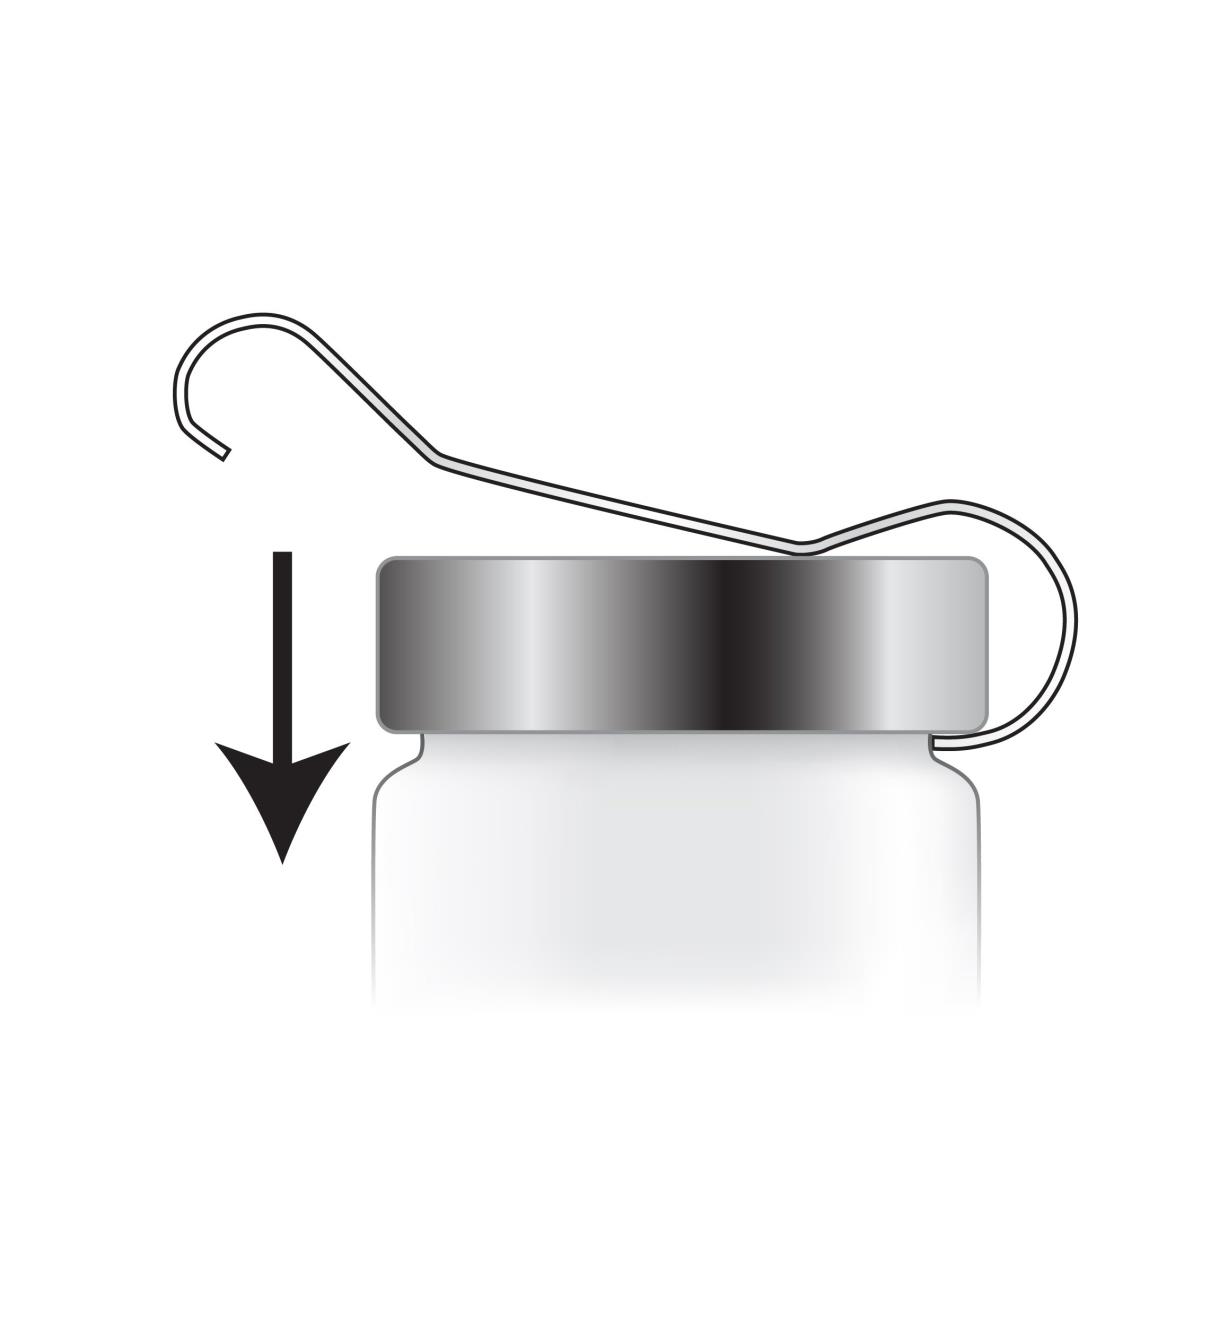 Illustration shows how to hook the opener onto the jar and press down